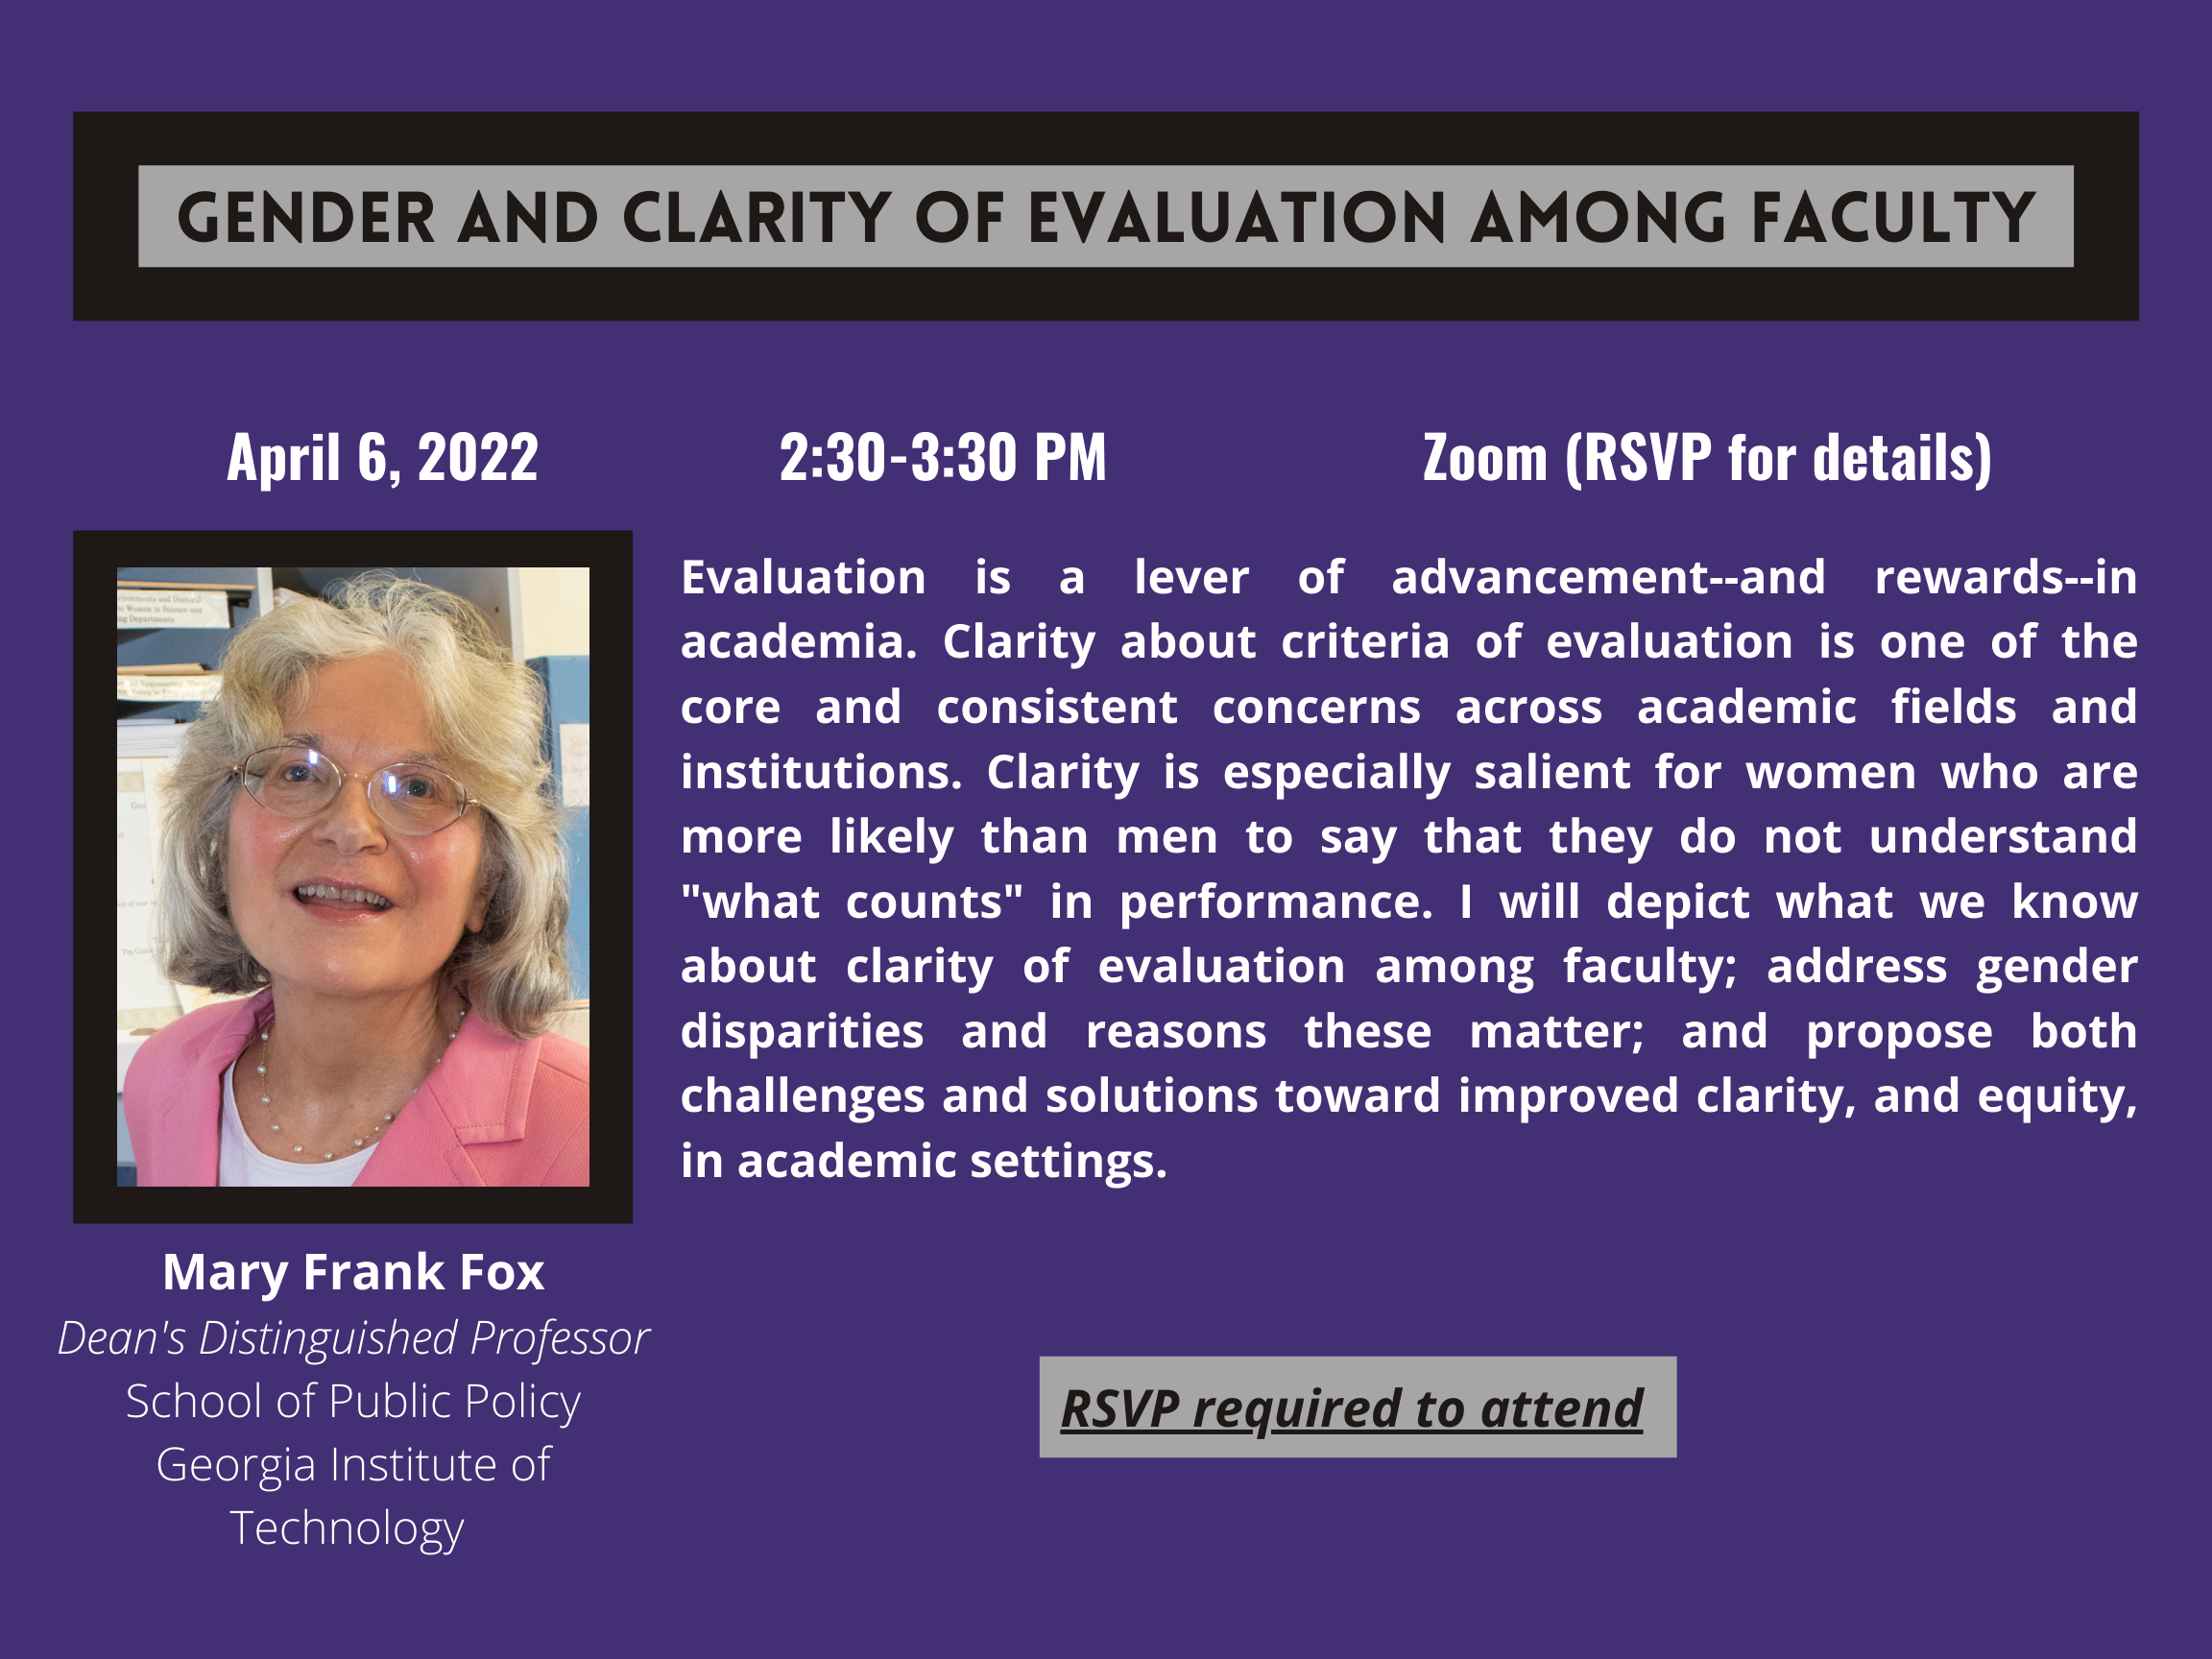 Flyer advertising Dr. Mary Frank Fox's Inclusive Leadership Series event on April 6 2022 from 2:30 to 3:30 pm